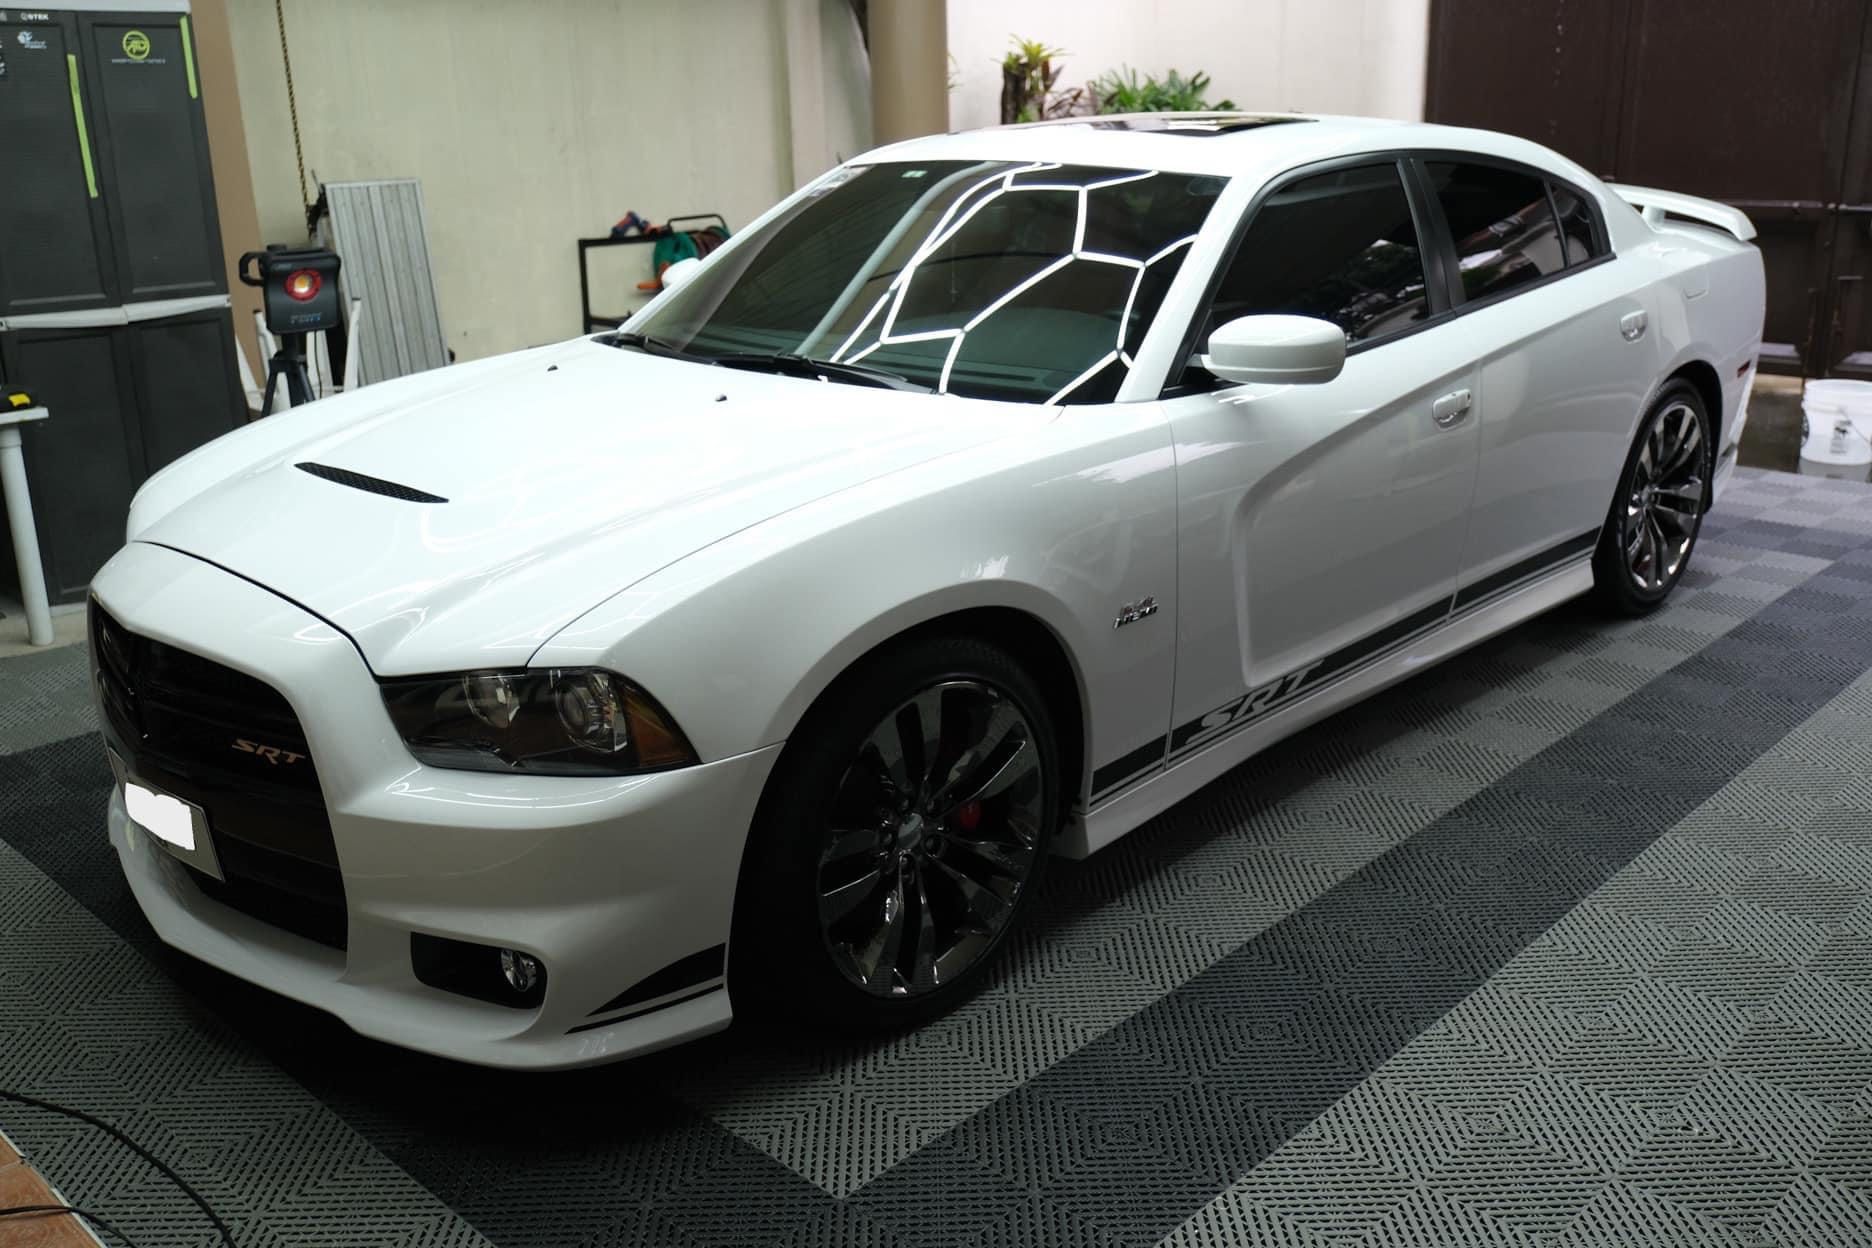 Used & 2nd hand Dodge Charger for Sale in Philippines